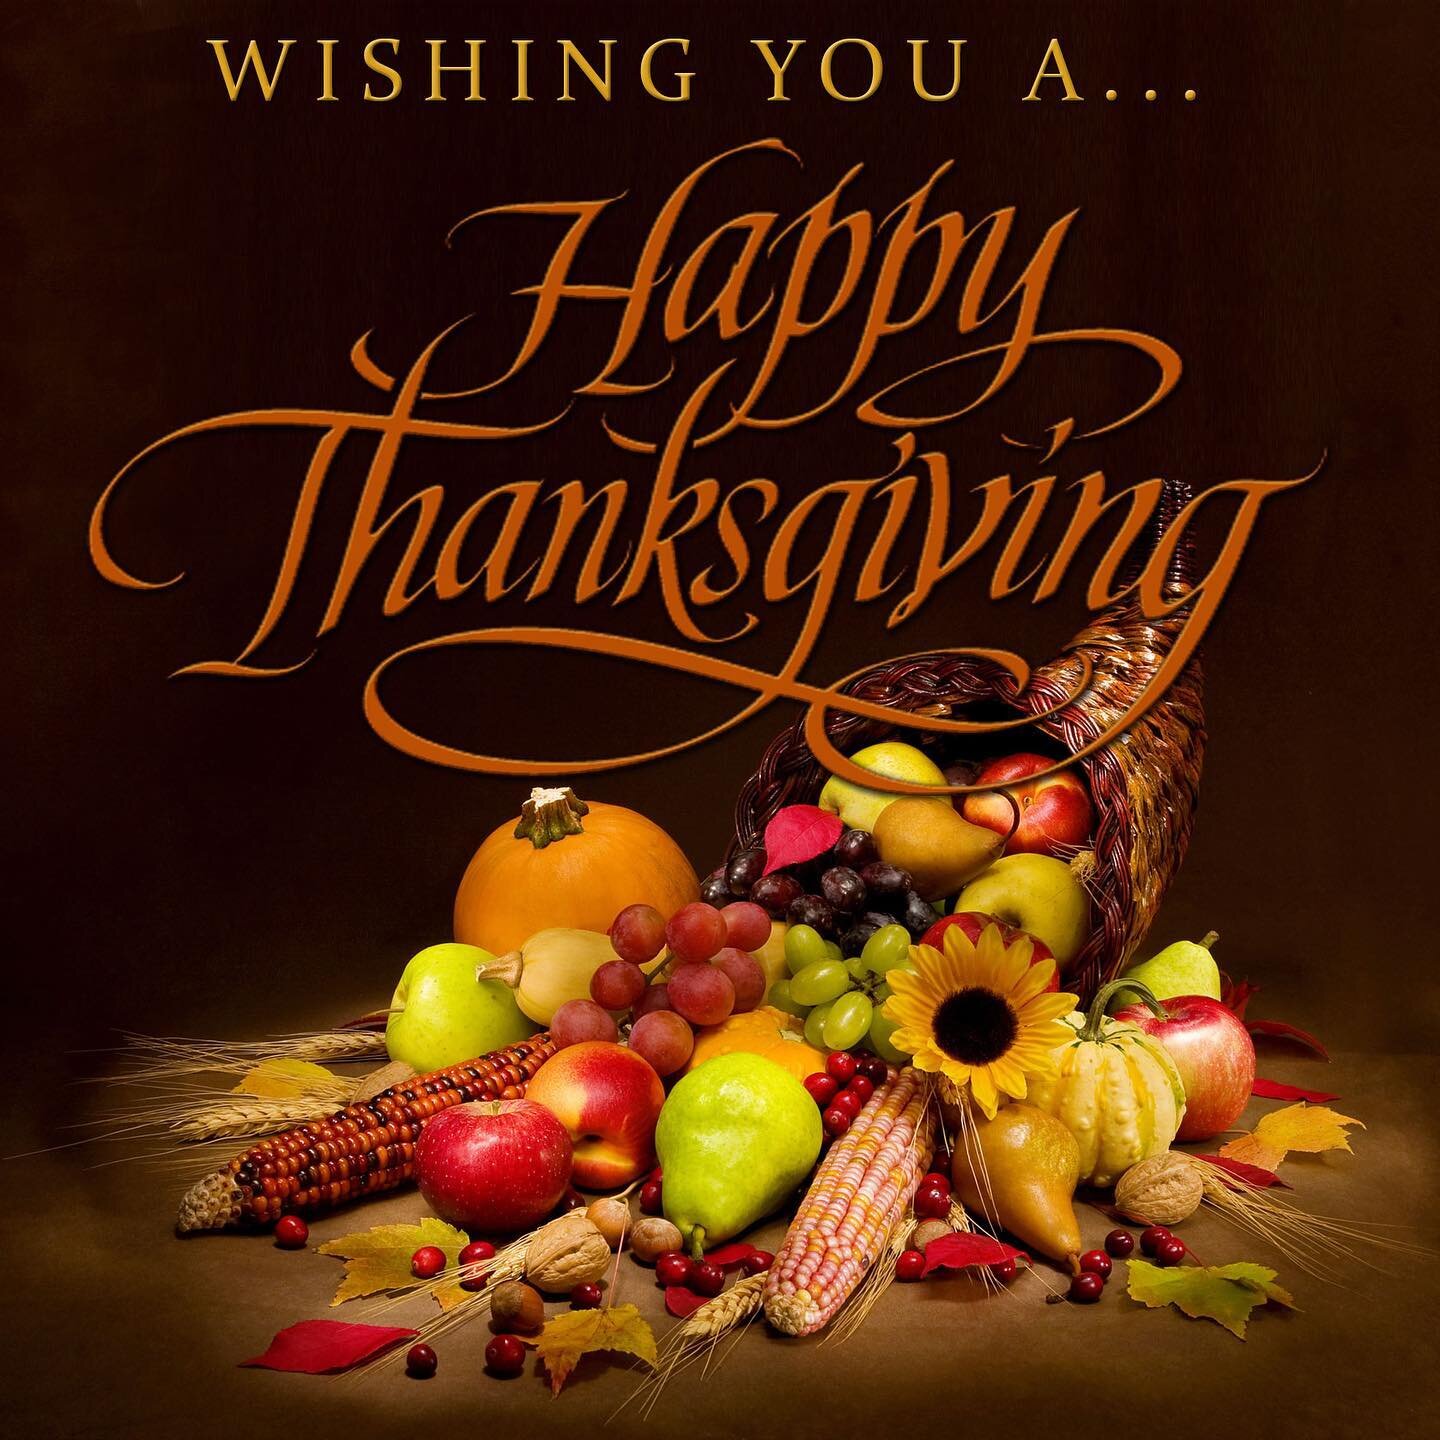 Happy Thanksgiving from our family to yours. We&rsquo;re so thankful this year for wonderful family, friends and customers!